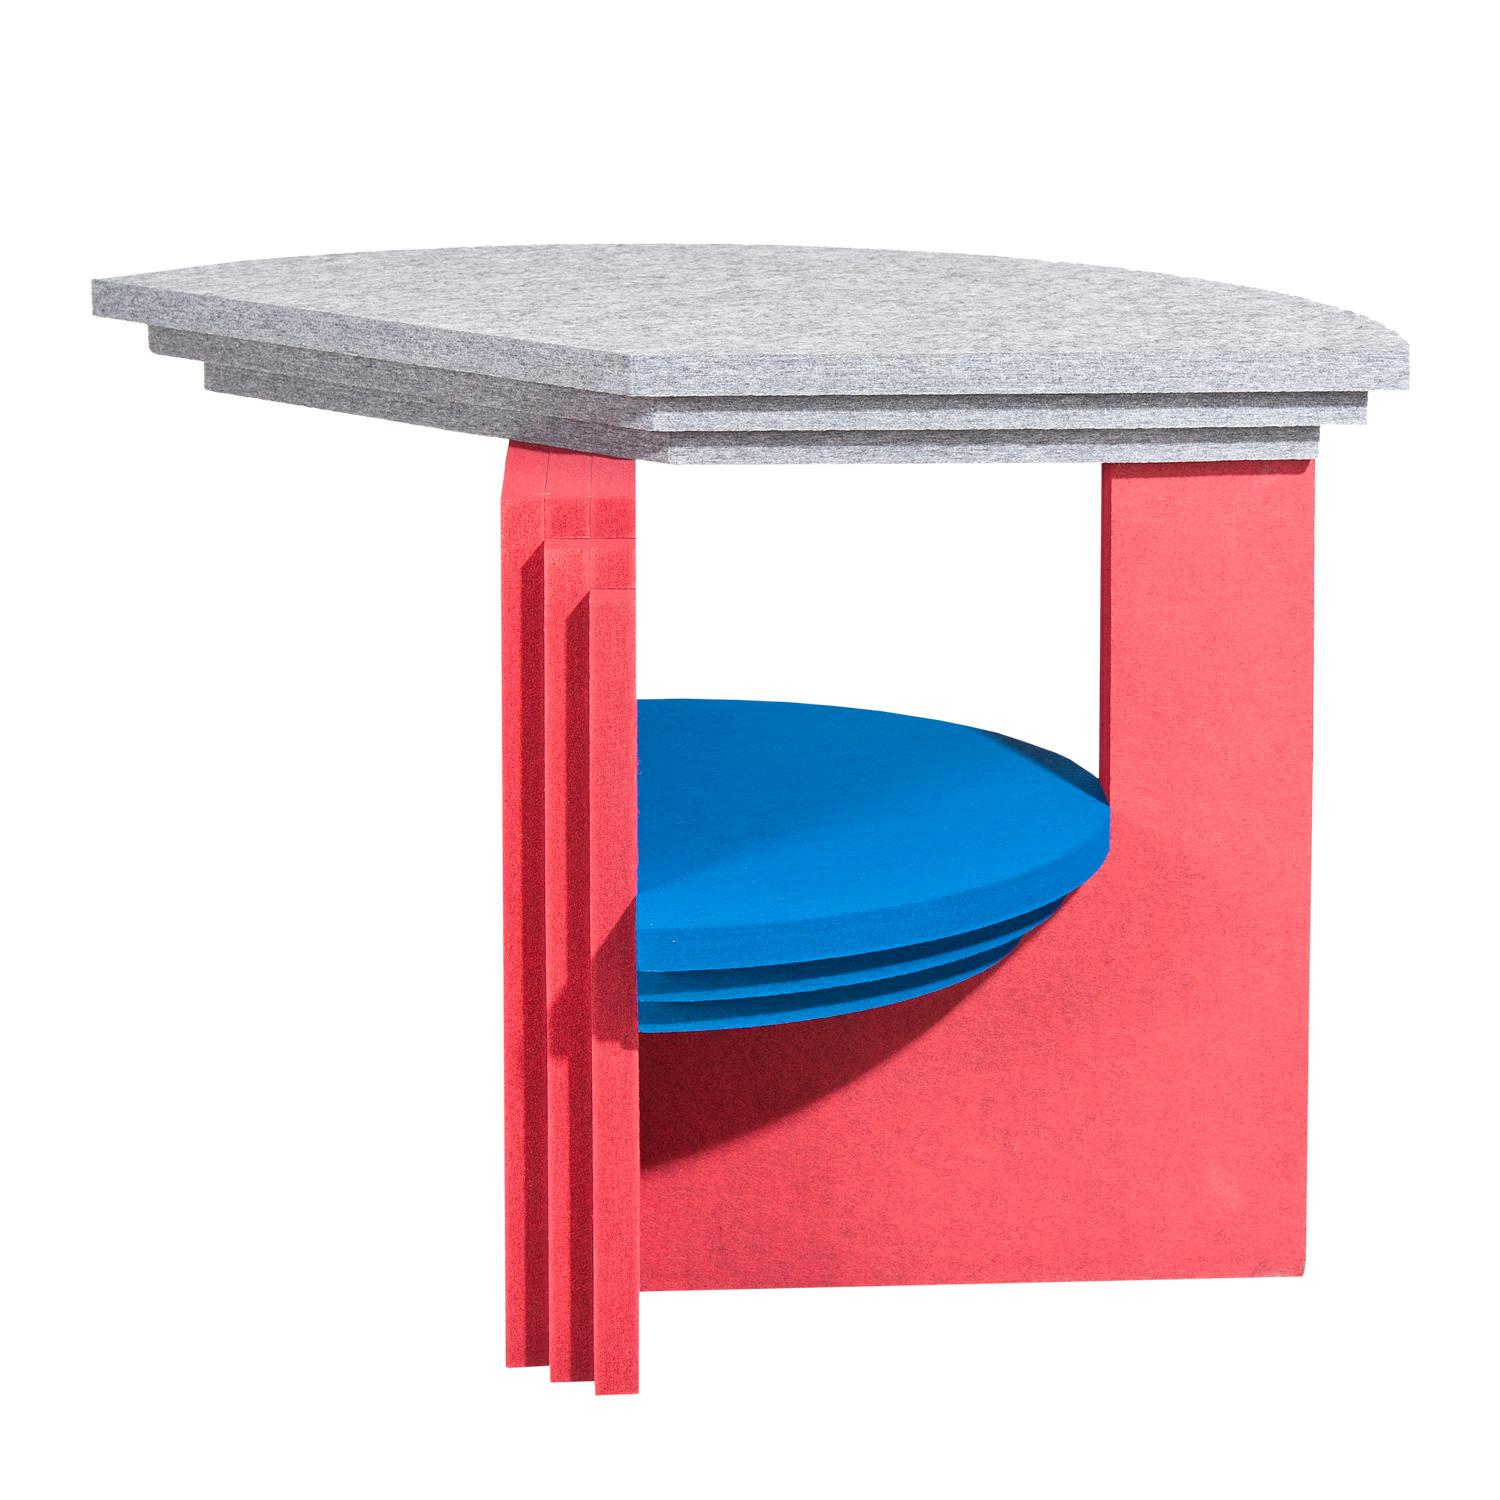 Blue red Kandinsky sound absorbing table by Marie Aigner.

This table has also an acoustical effectiveness and hereby melts 2 functions with design. The elemental parts are cutout of highly compressed, 25 mm thick panels, produced out of 100%